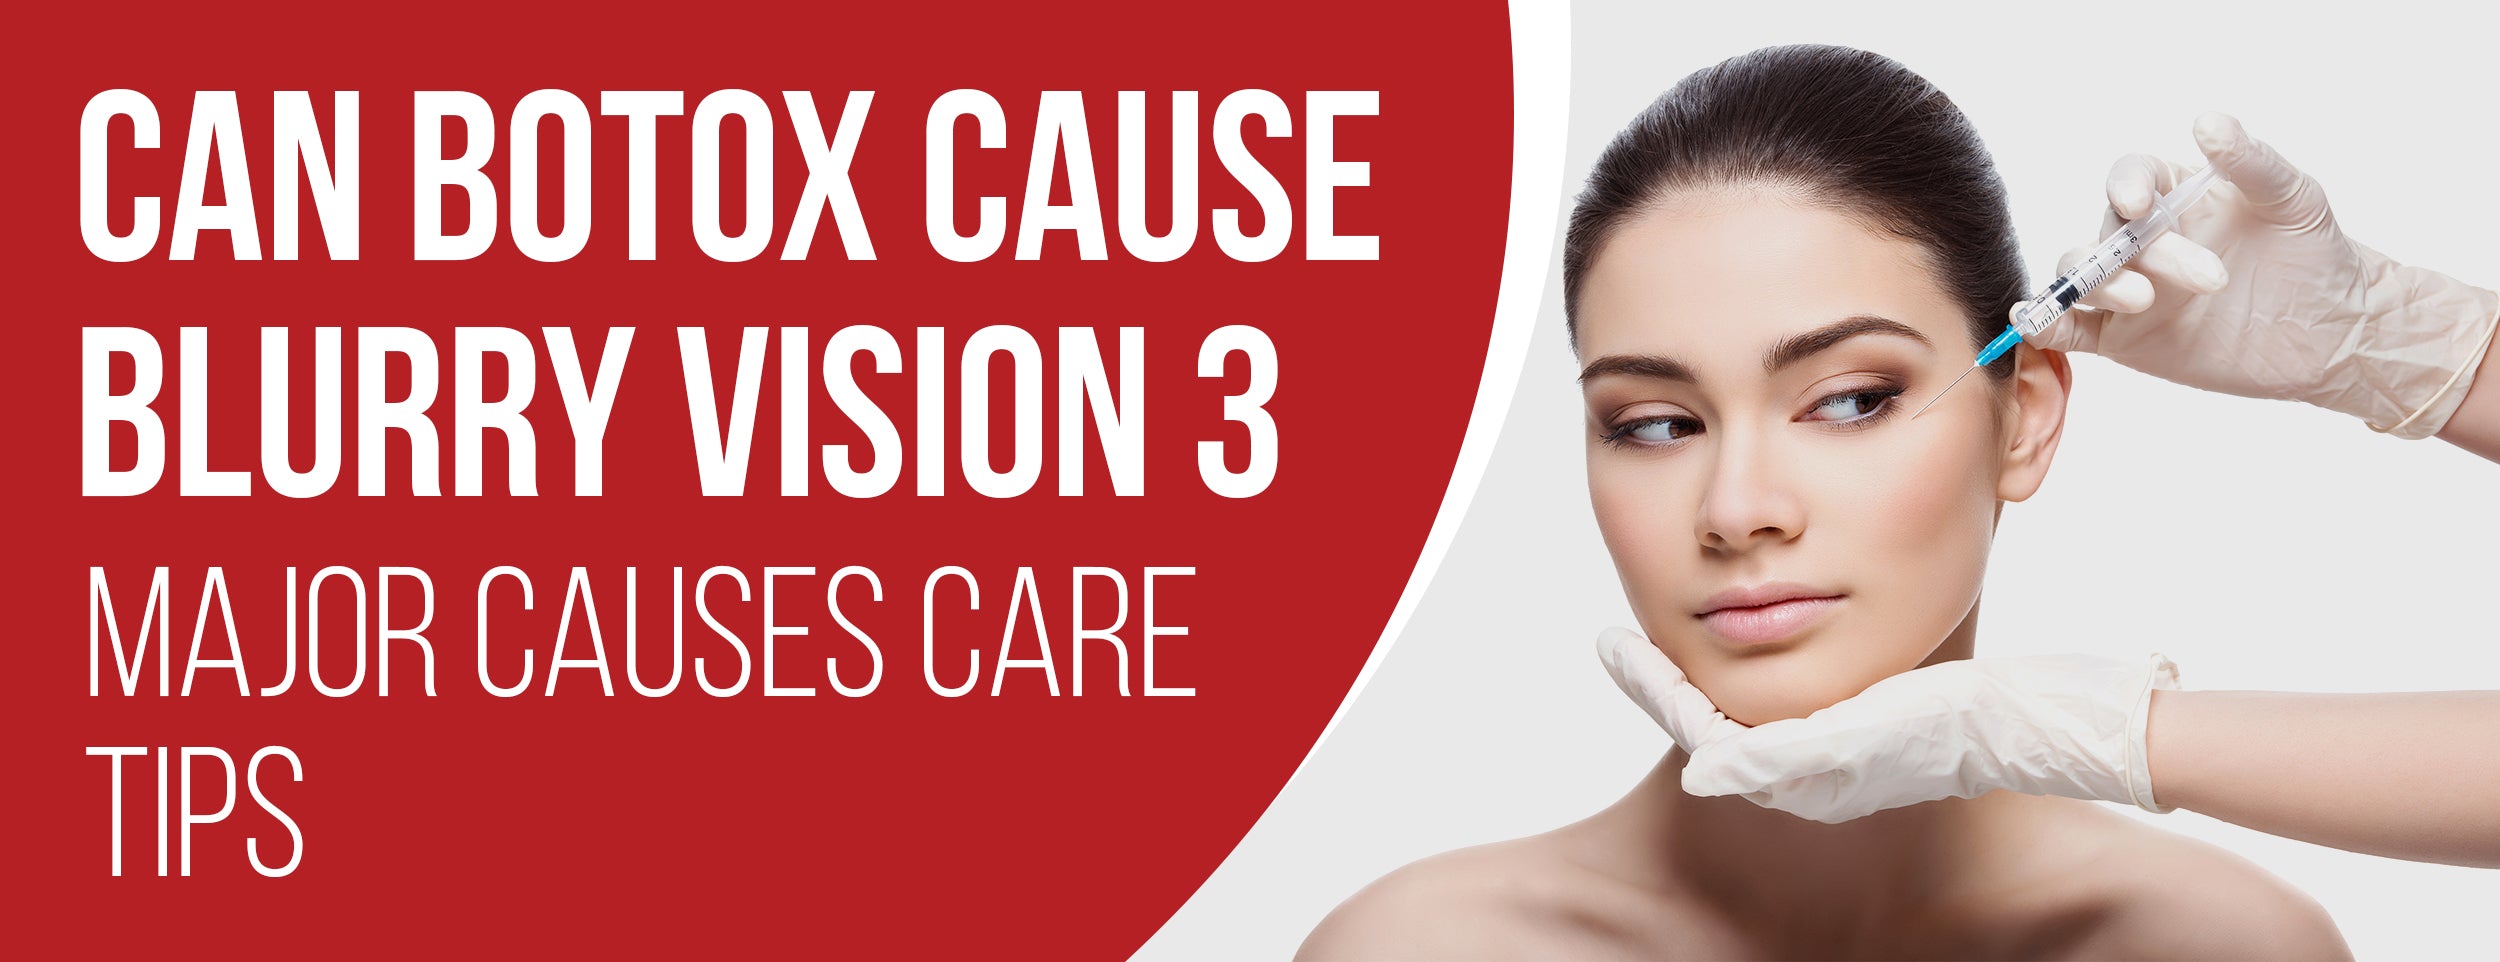 3 Major Causes & Care Tips [With Incidence and Prevalence] of Blurry Vision After Botox